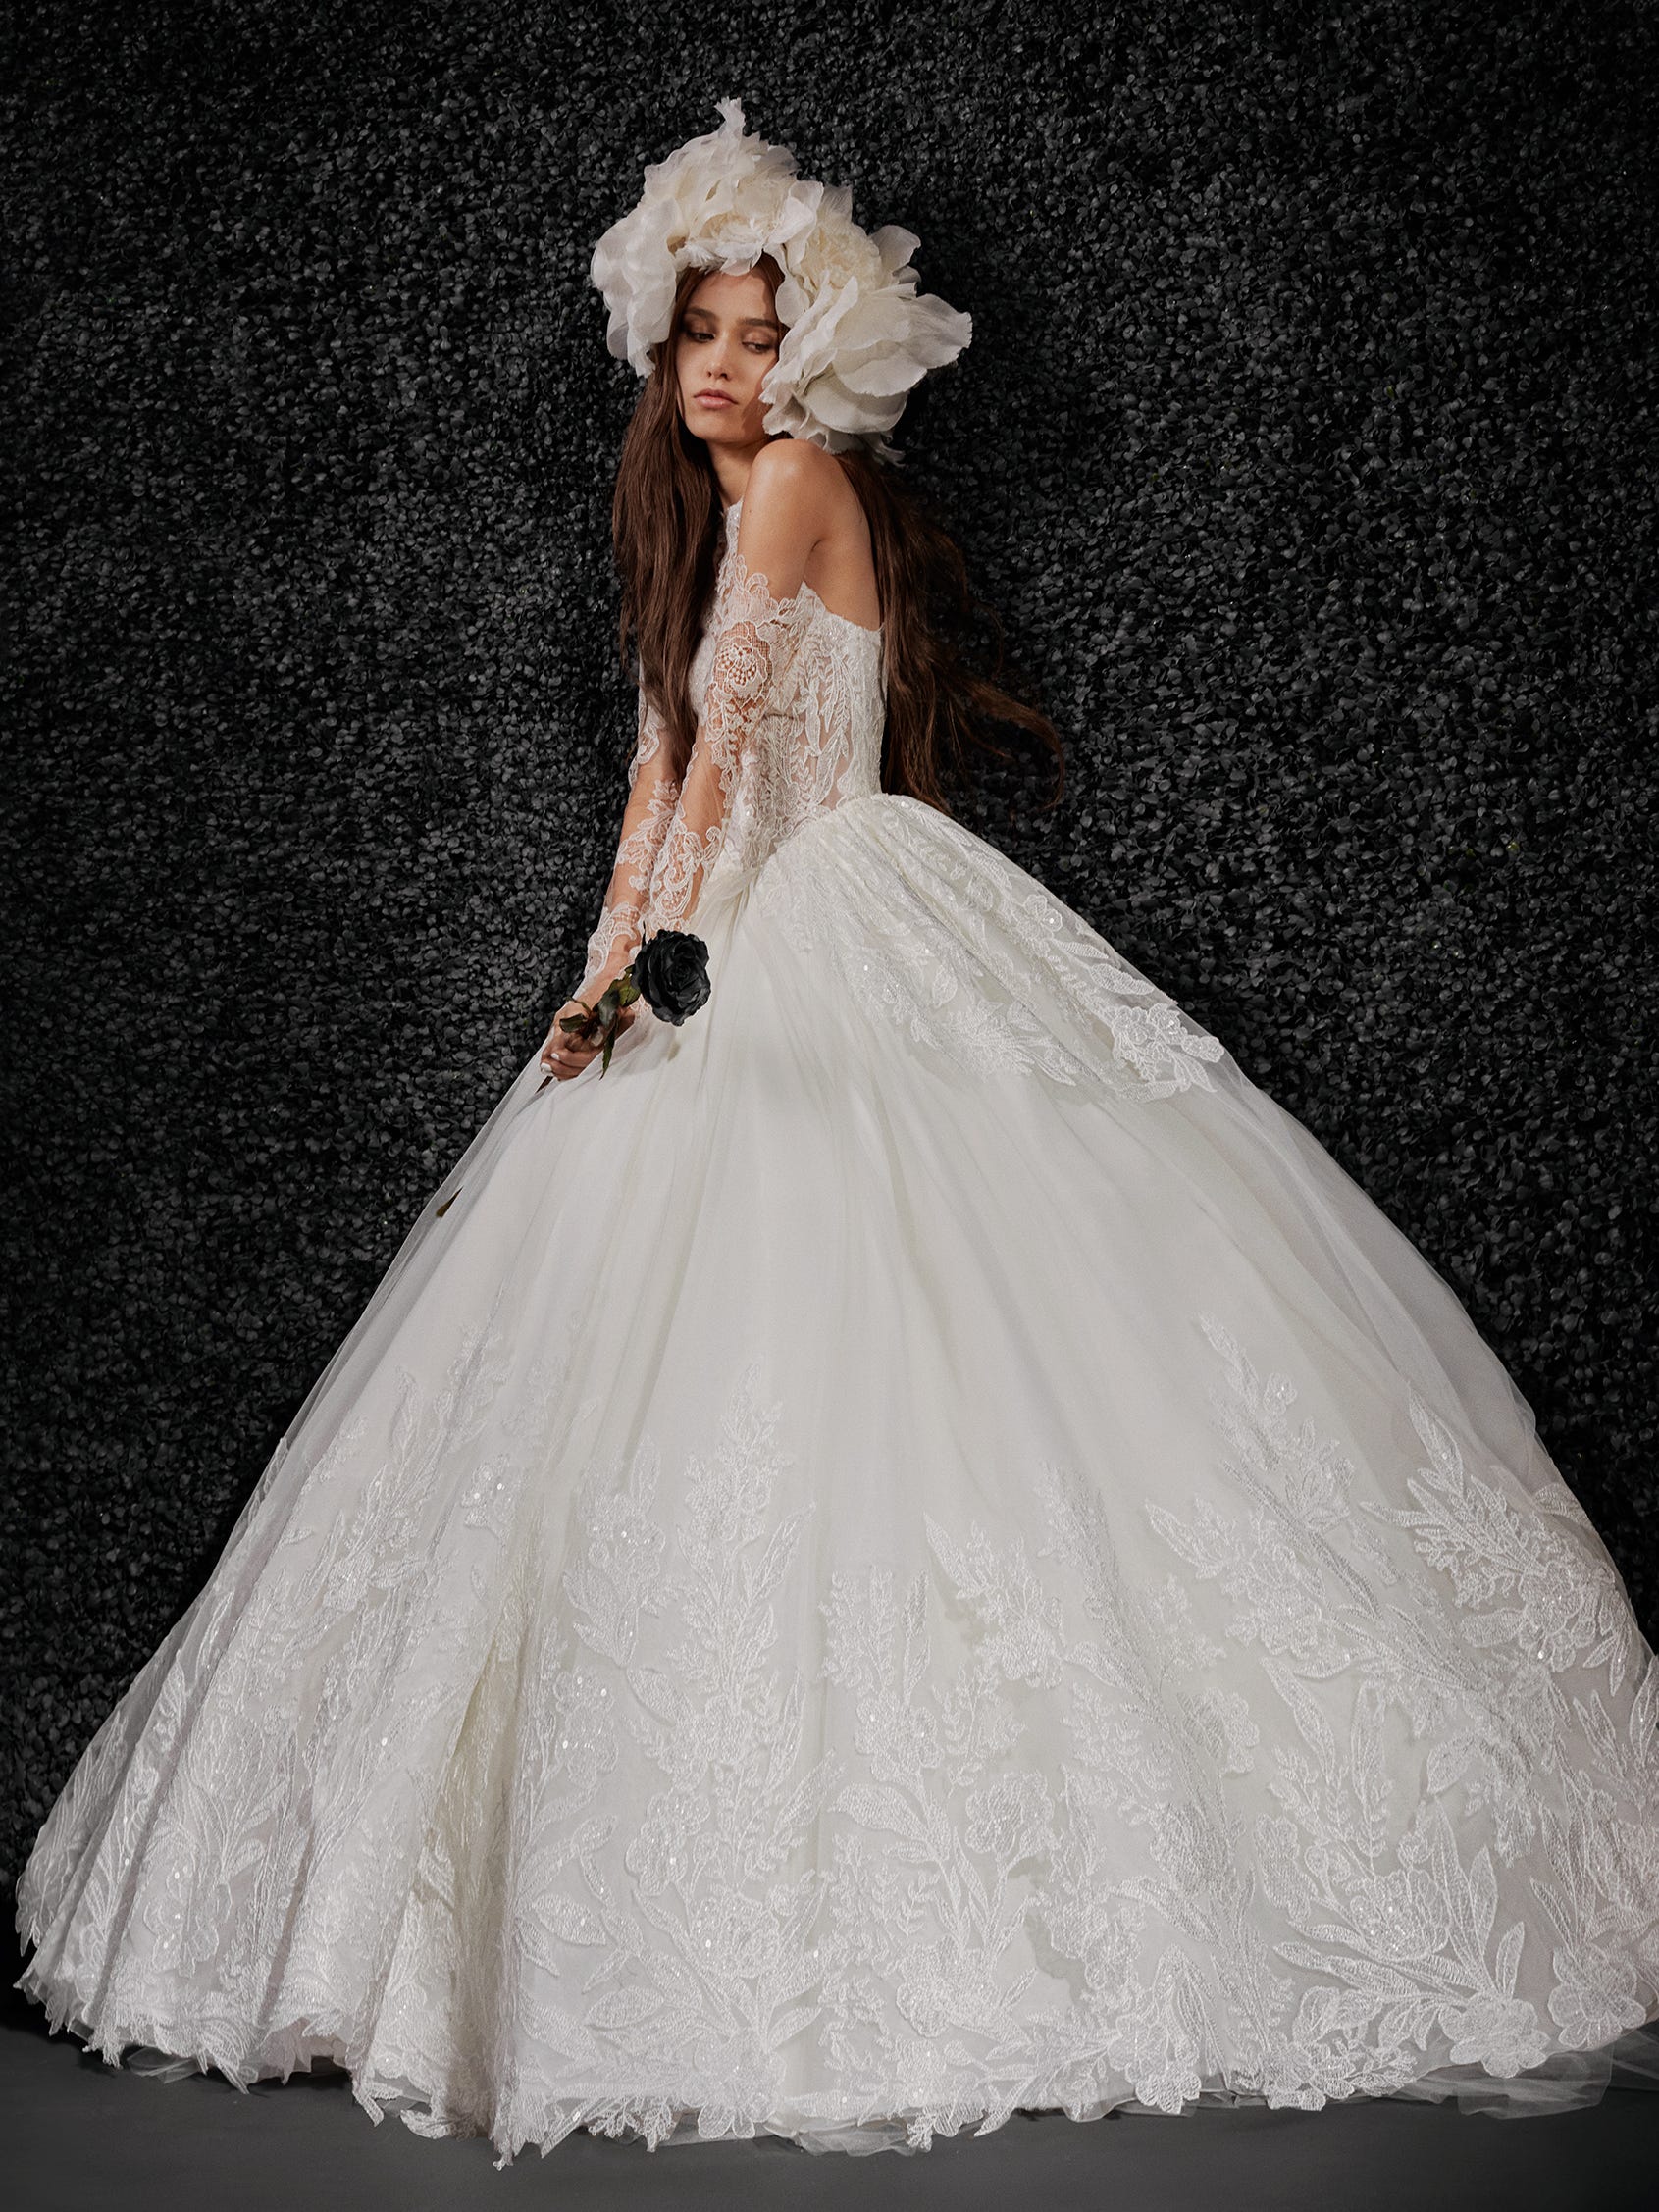 Vera Wang Bride reveals its first collection